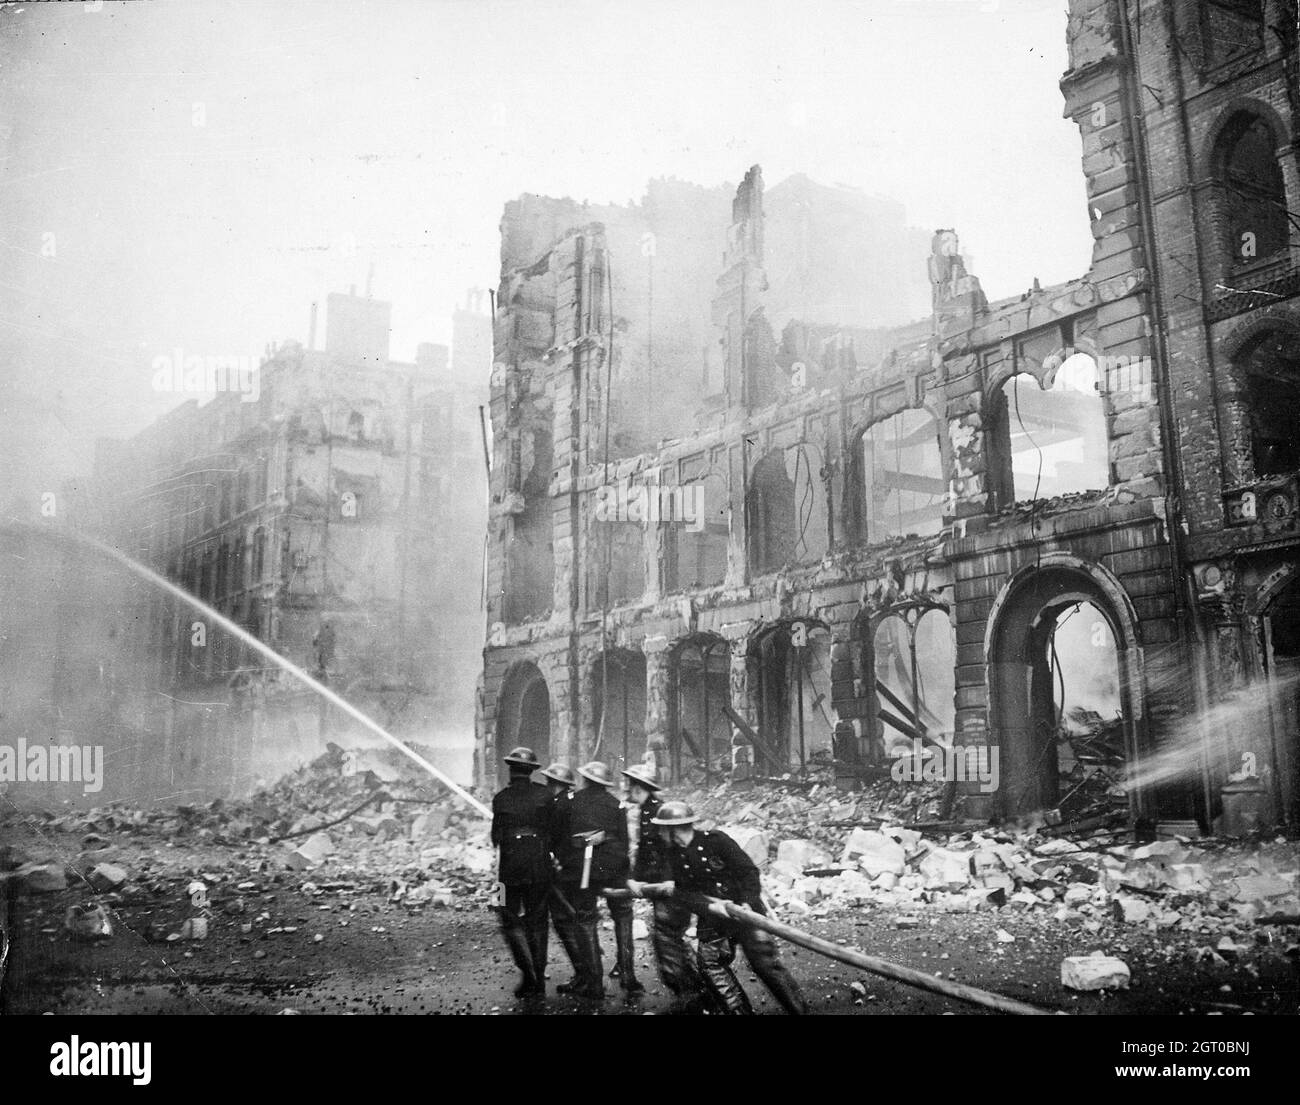 Firefighters putting out a blaze in London after an air raid during The Blitz in 1941. Stock Photo